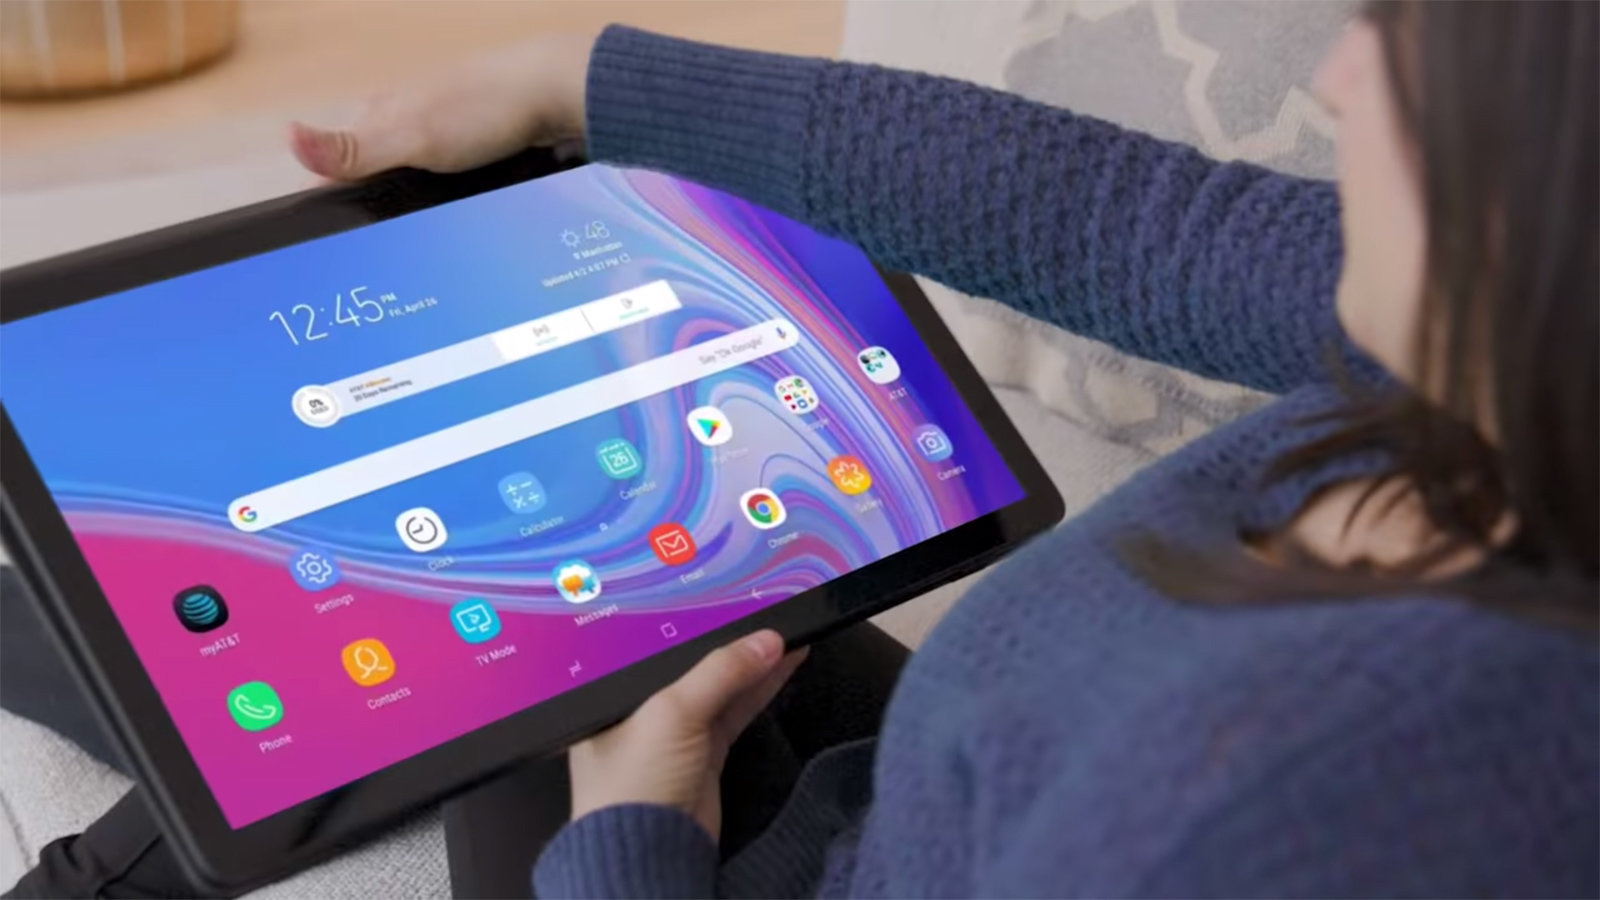 Samsung 17.3-inch Galaxy View 2 tablet Launched